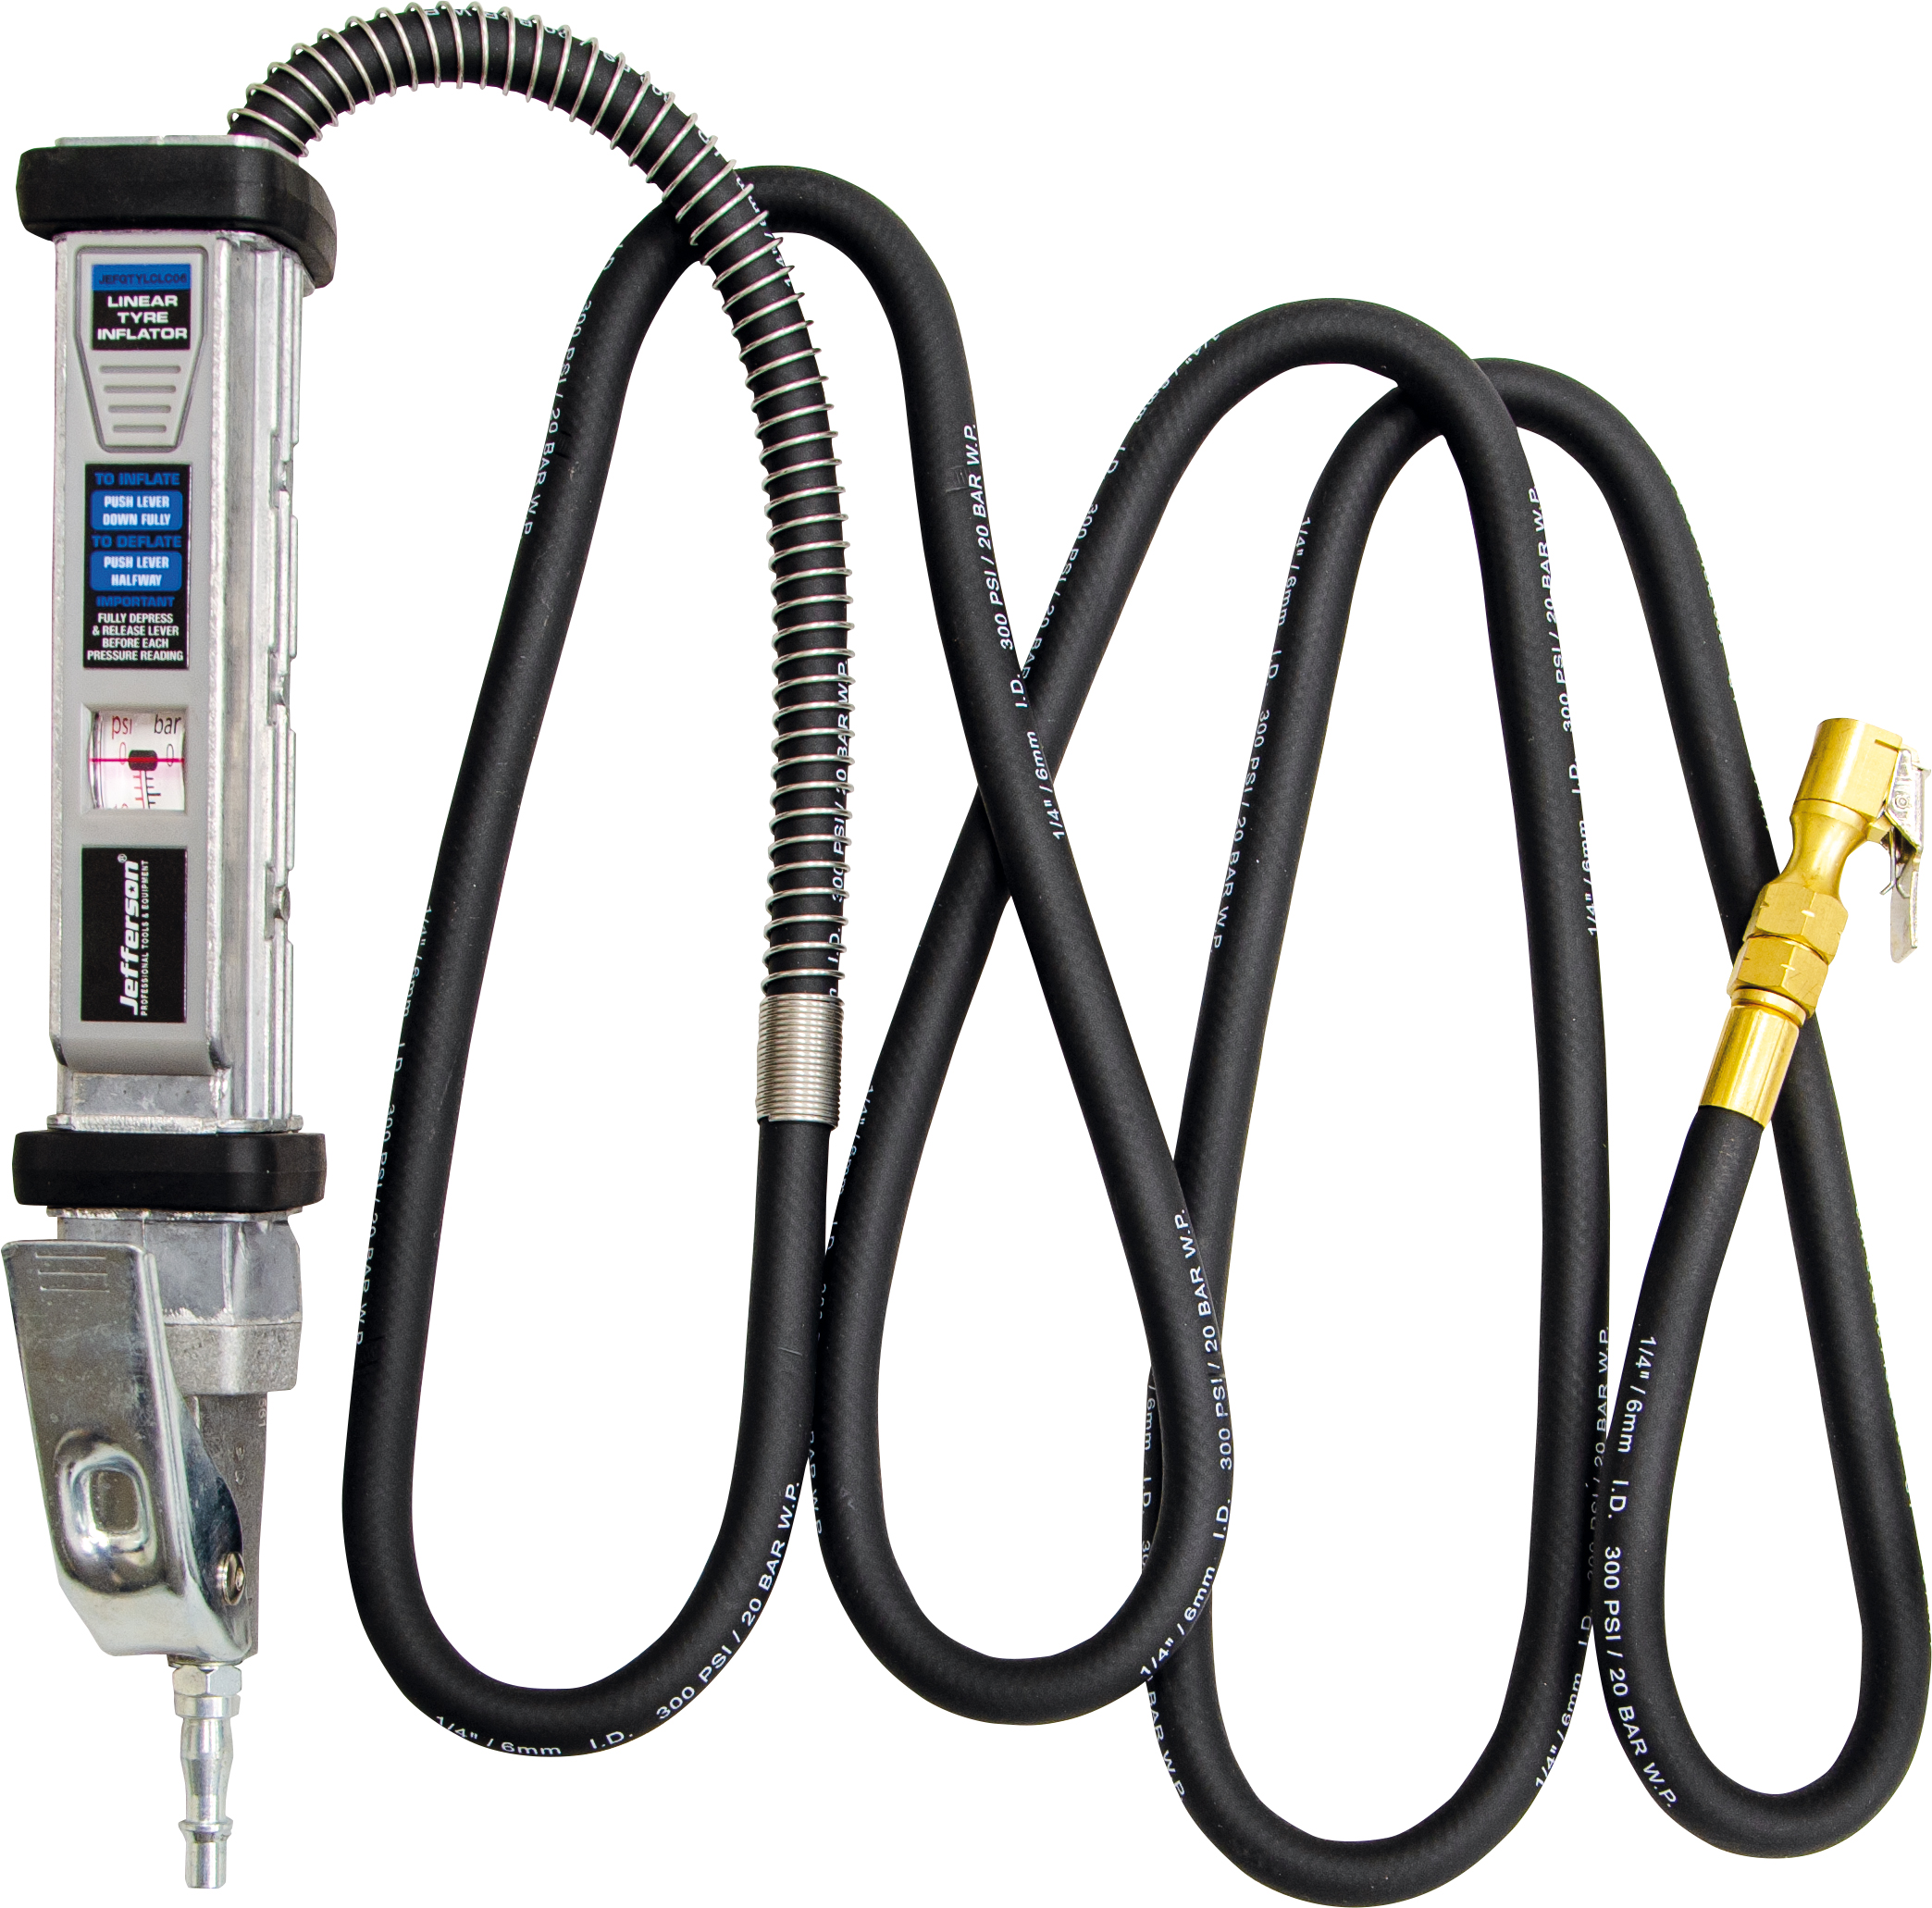 PROFESSIONAL TYRE INFLATOR - Hydraquip